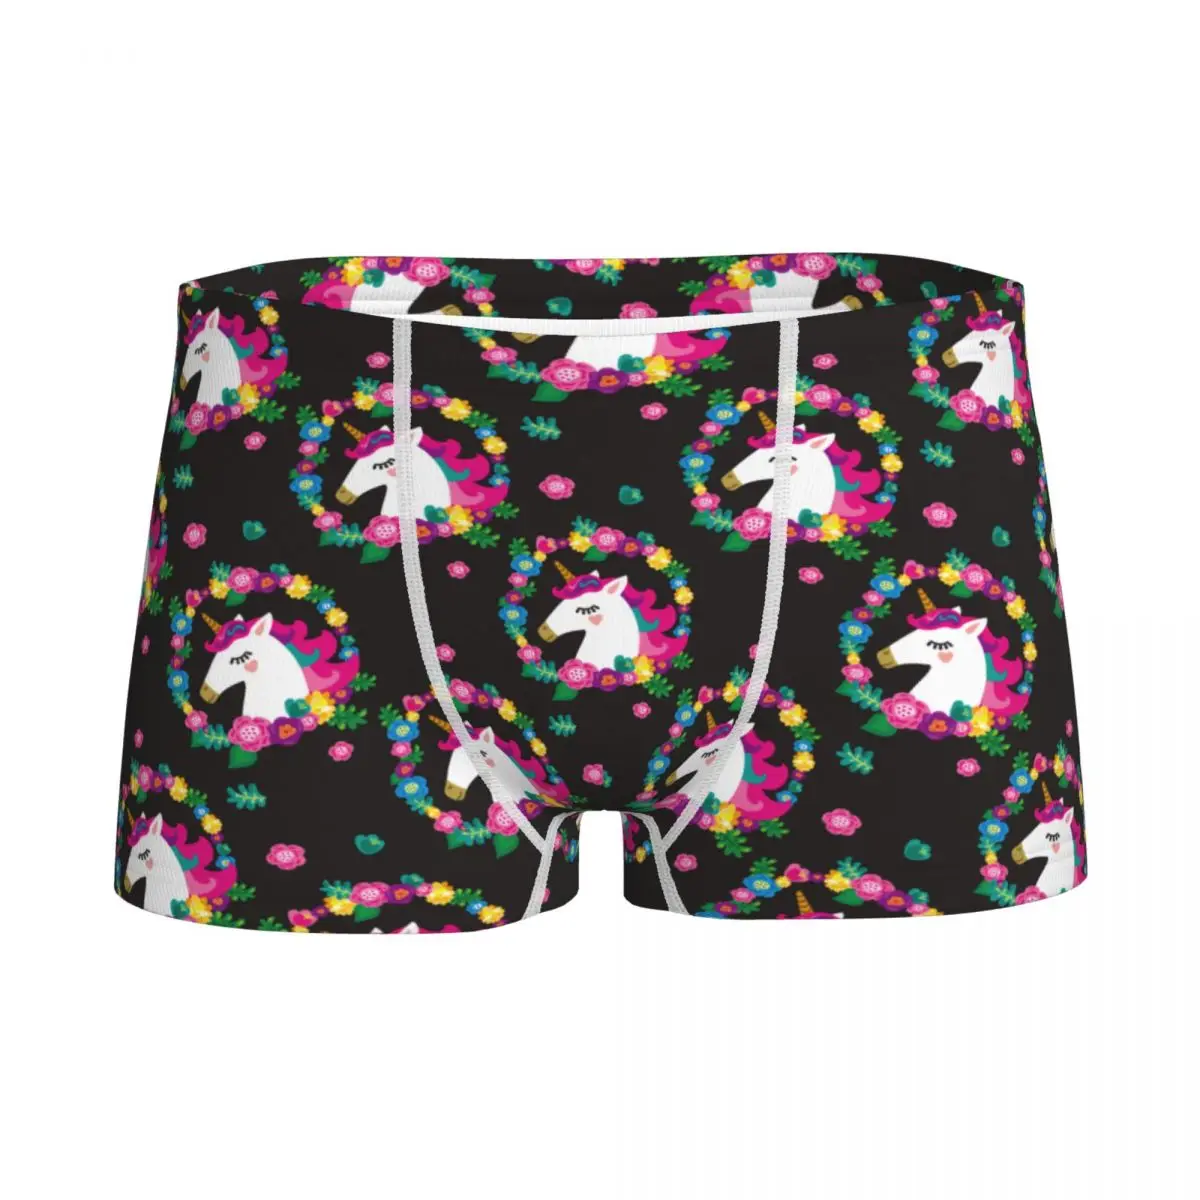 

Boys Colorful Unicorn Animal Boxer Shorts Cotton Youth Soft Underwear Man Briefs Popularity Teenagers Underpants